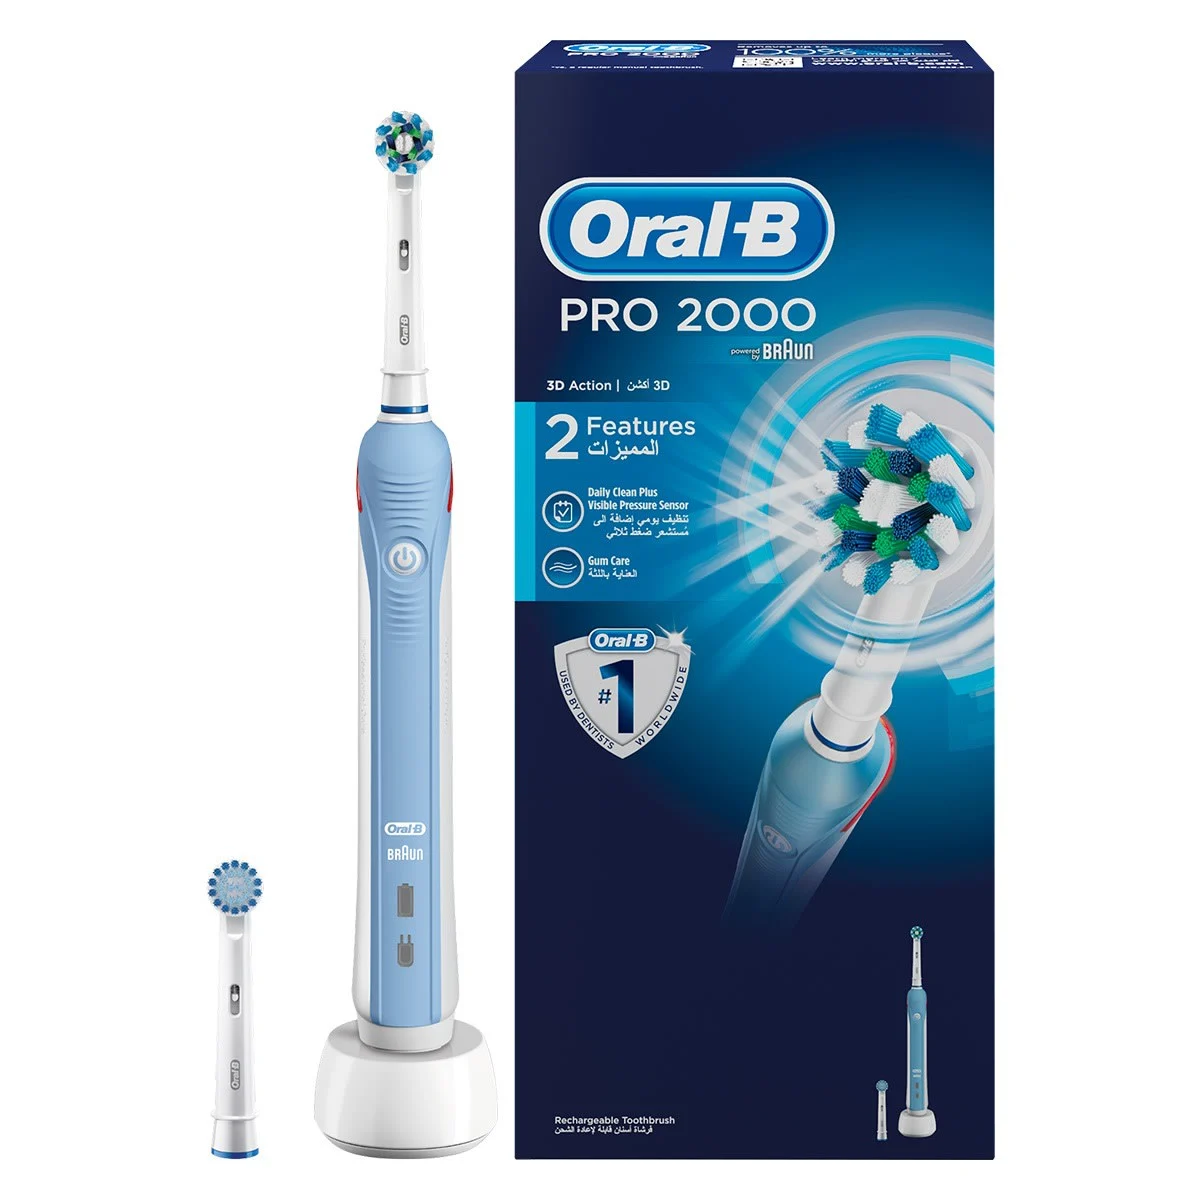 Oral-B Pro 2000 Electric Toothbrush Powered by Braun 